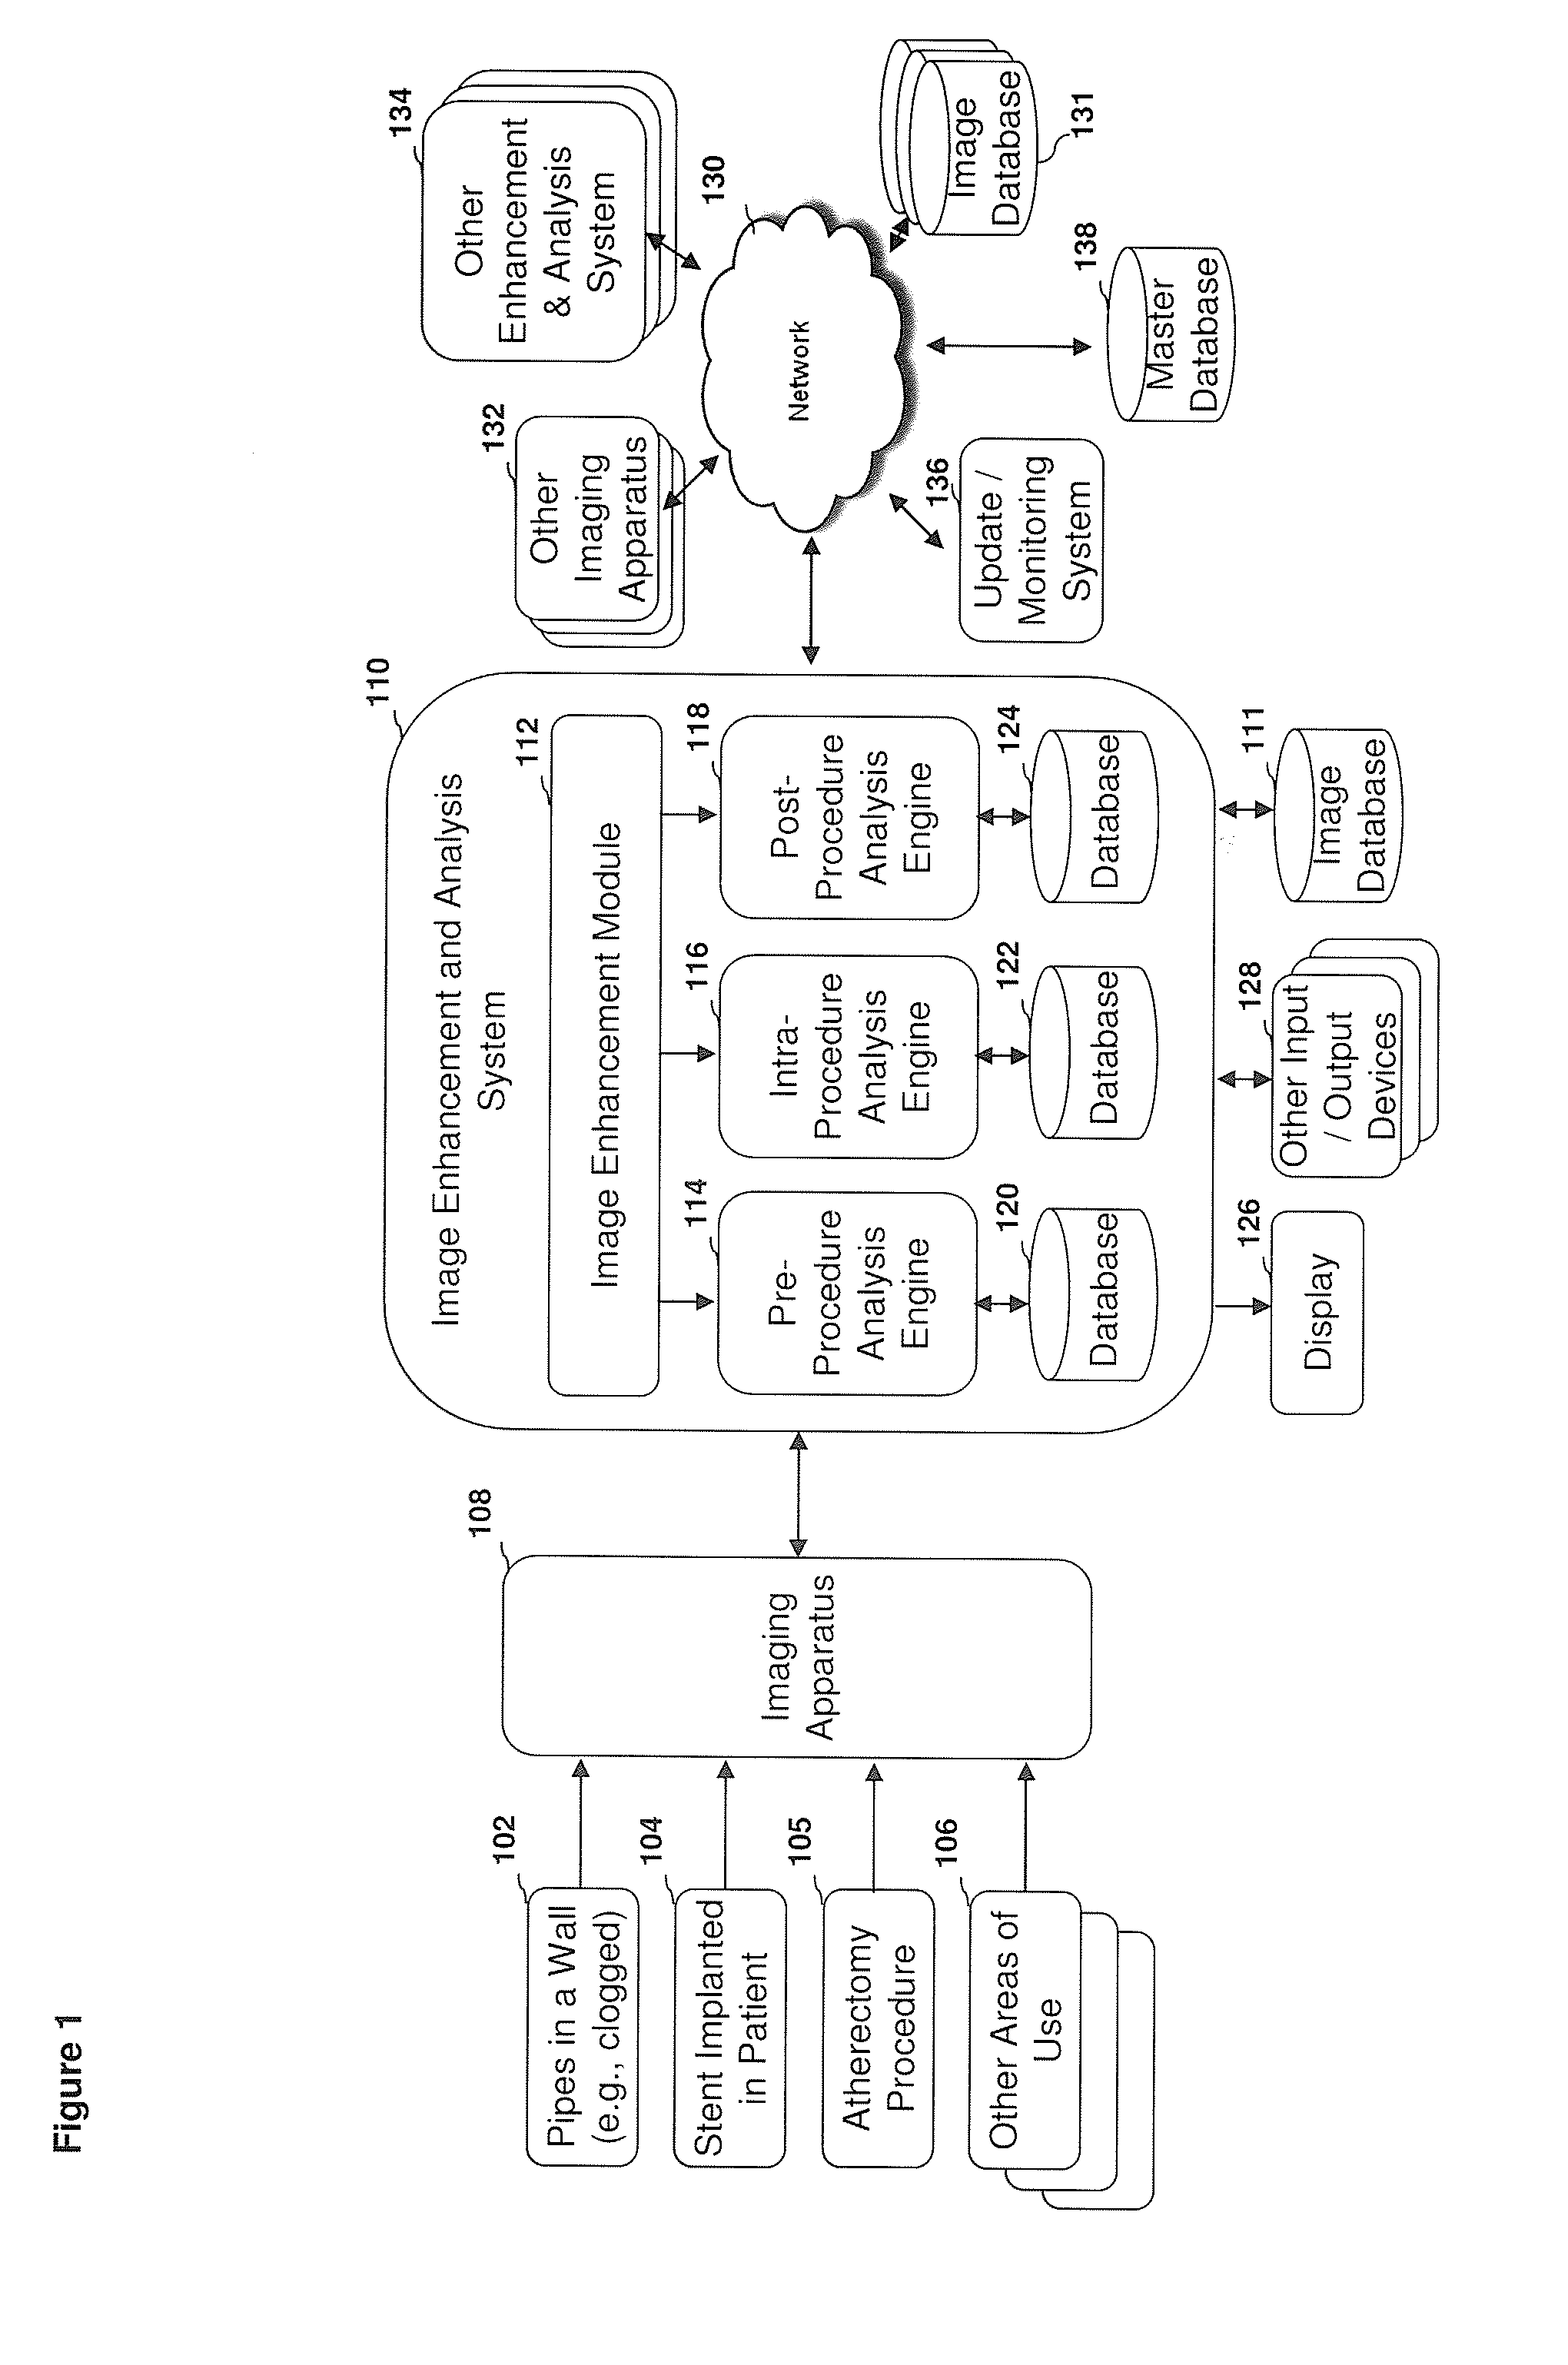 Image enhancement and application functionality for medical and other uses